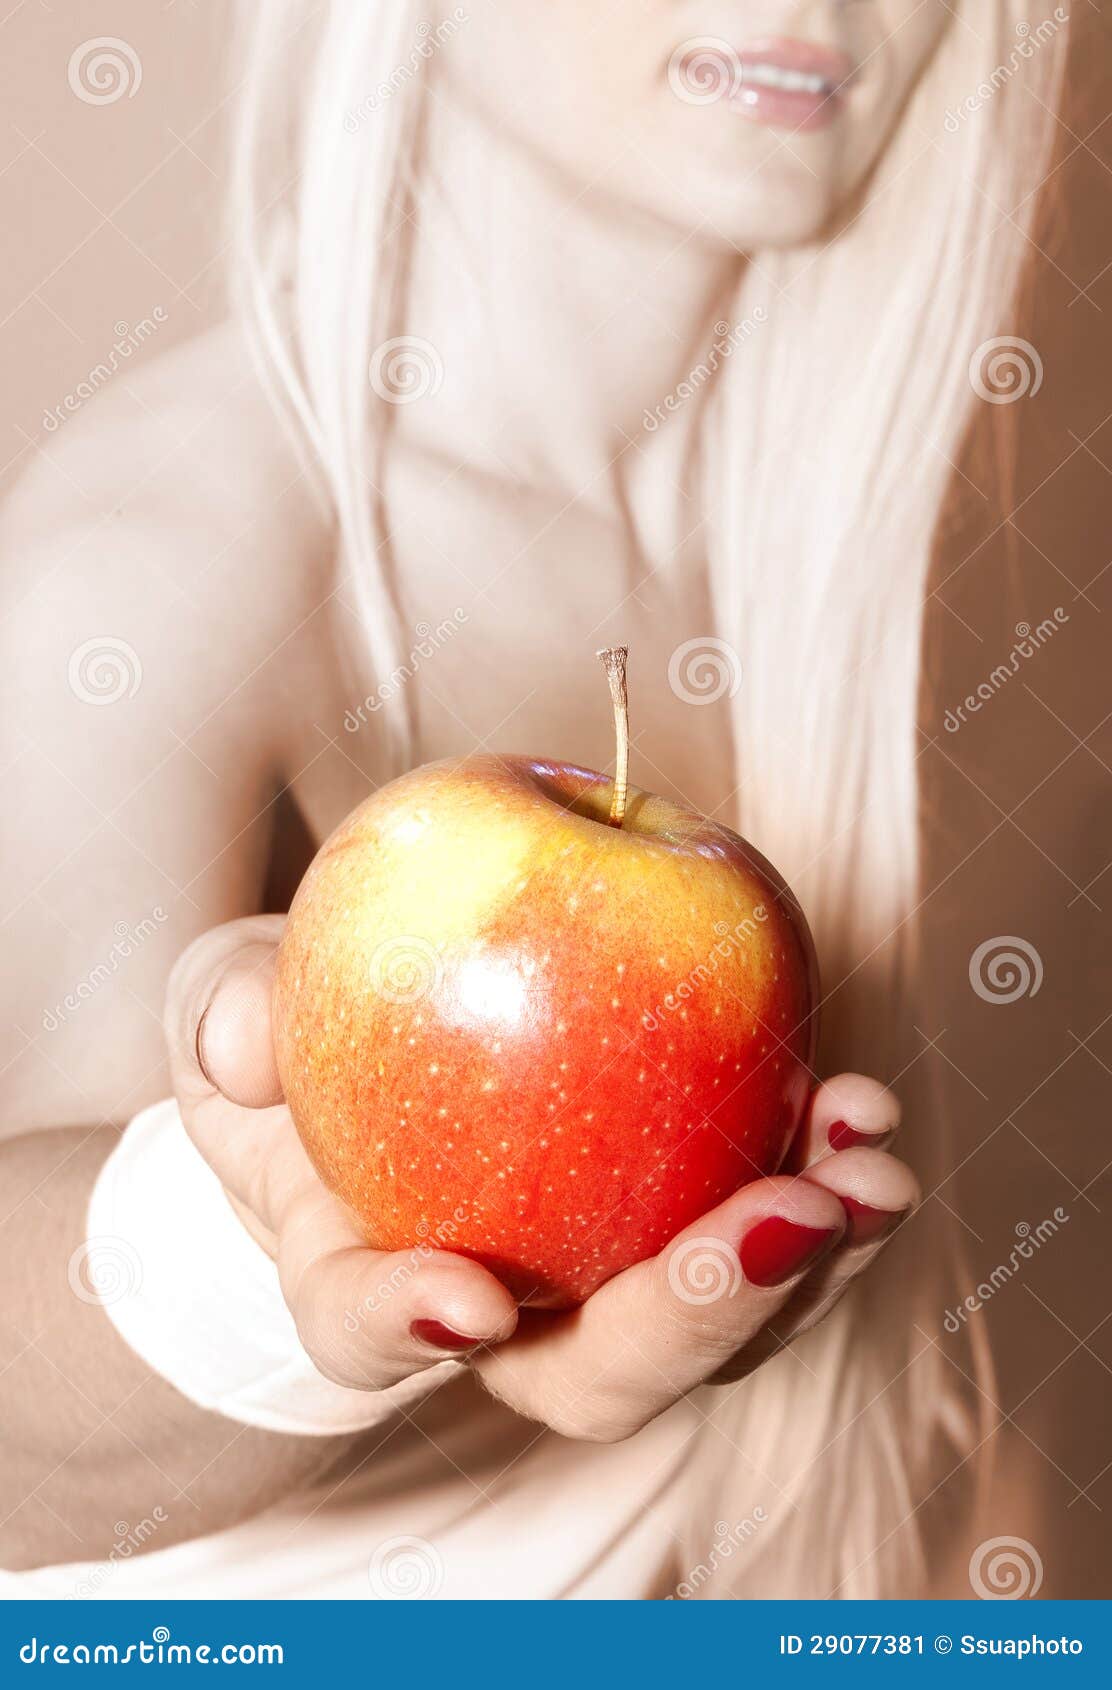 hand that suggests to take apple